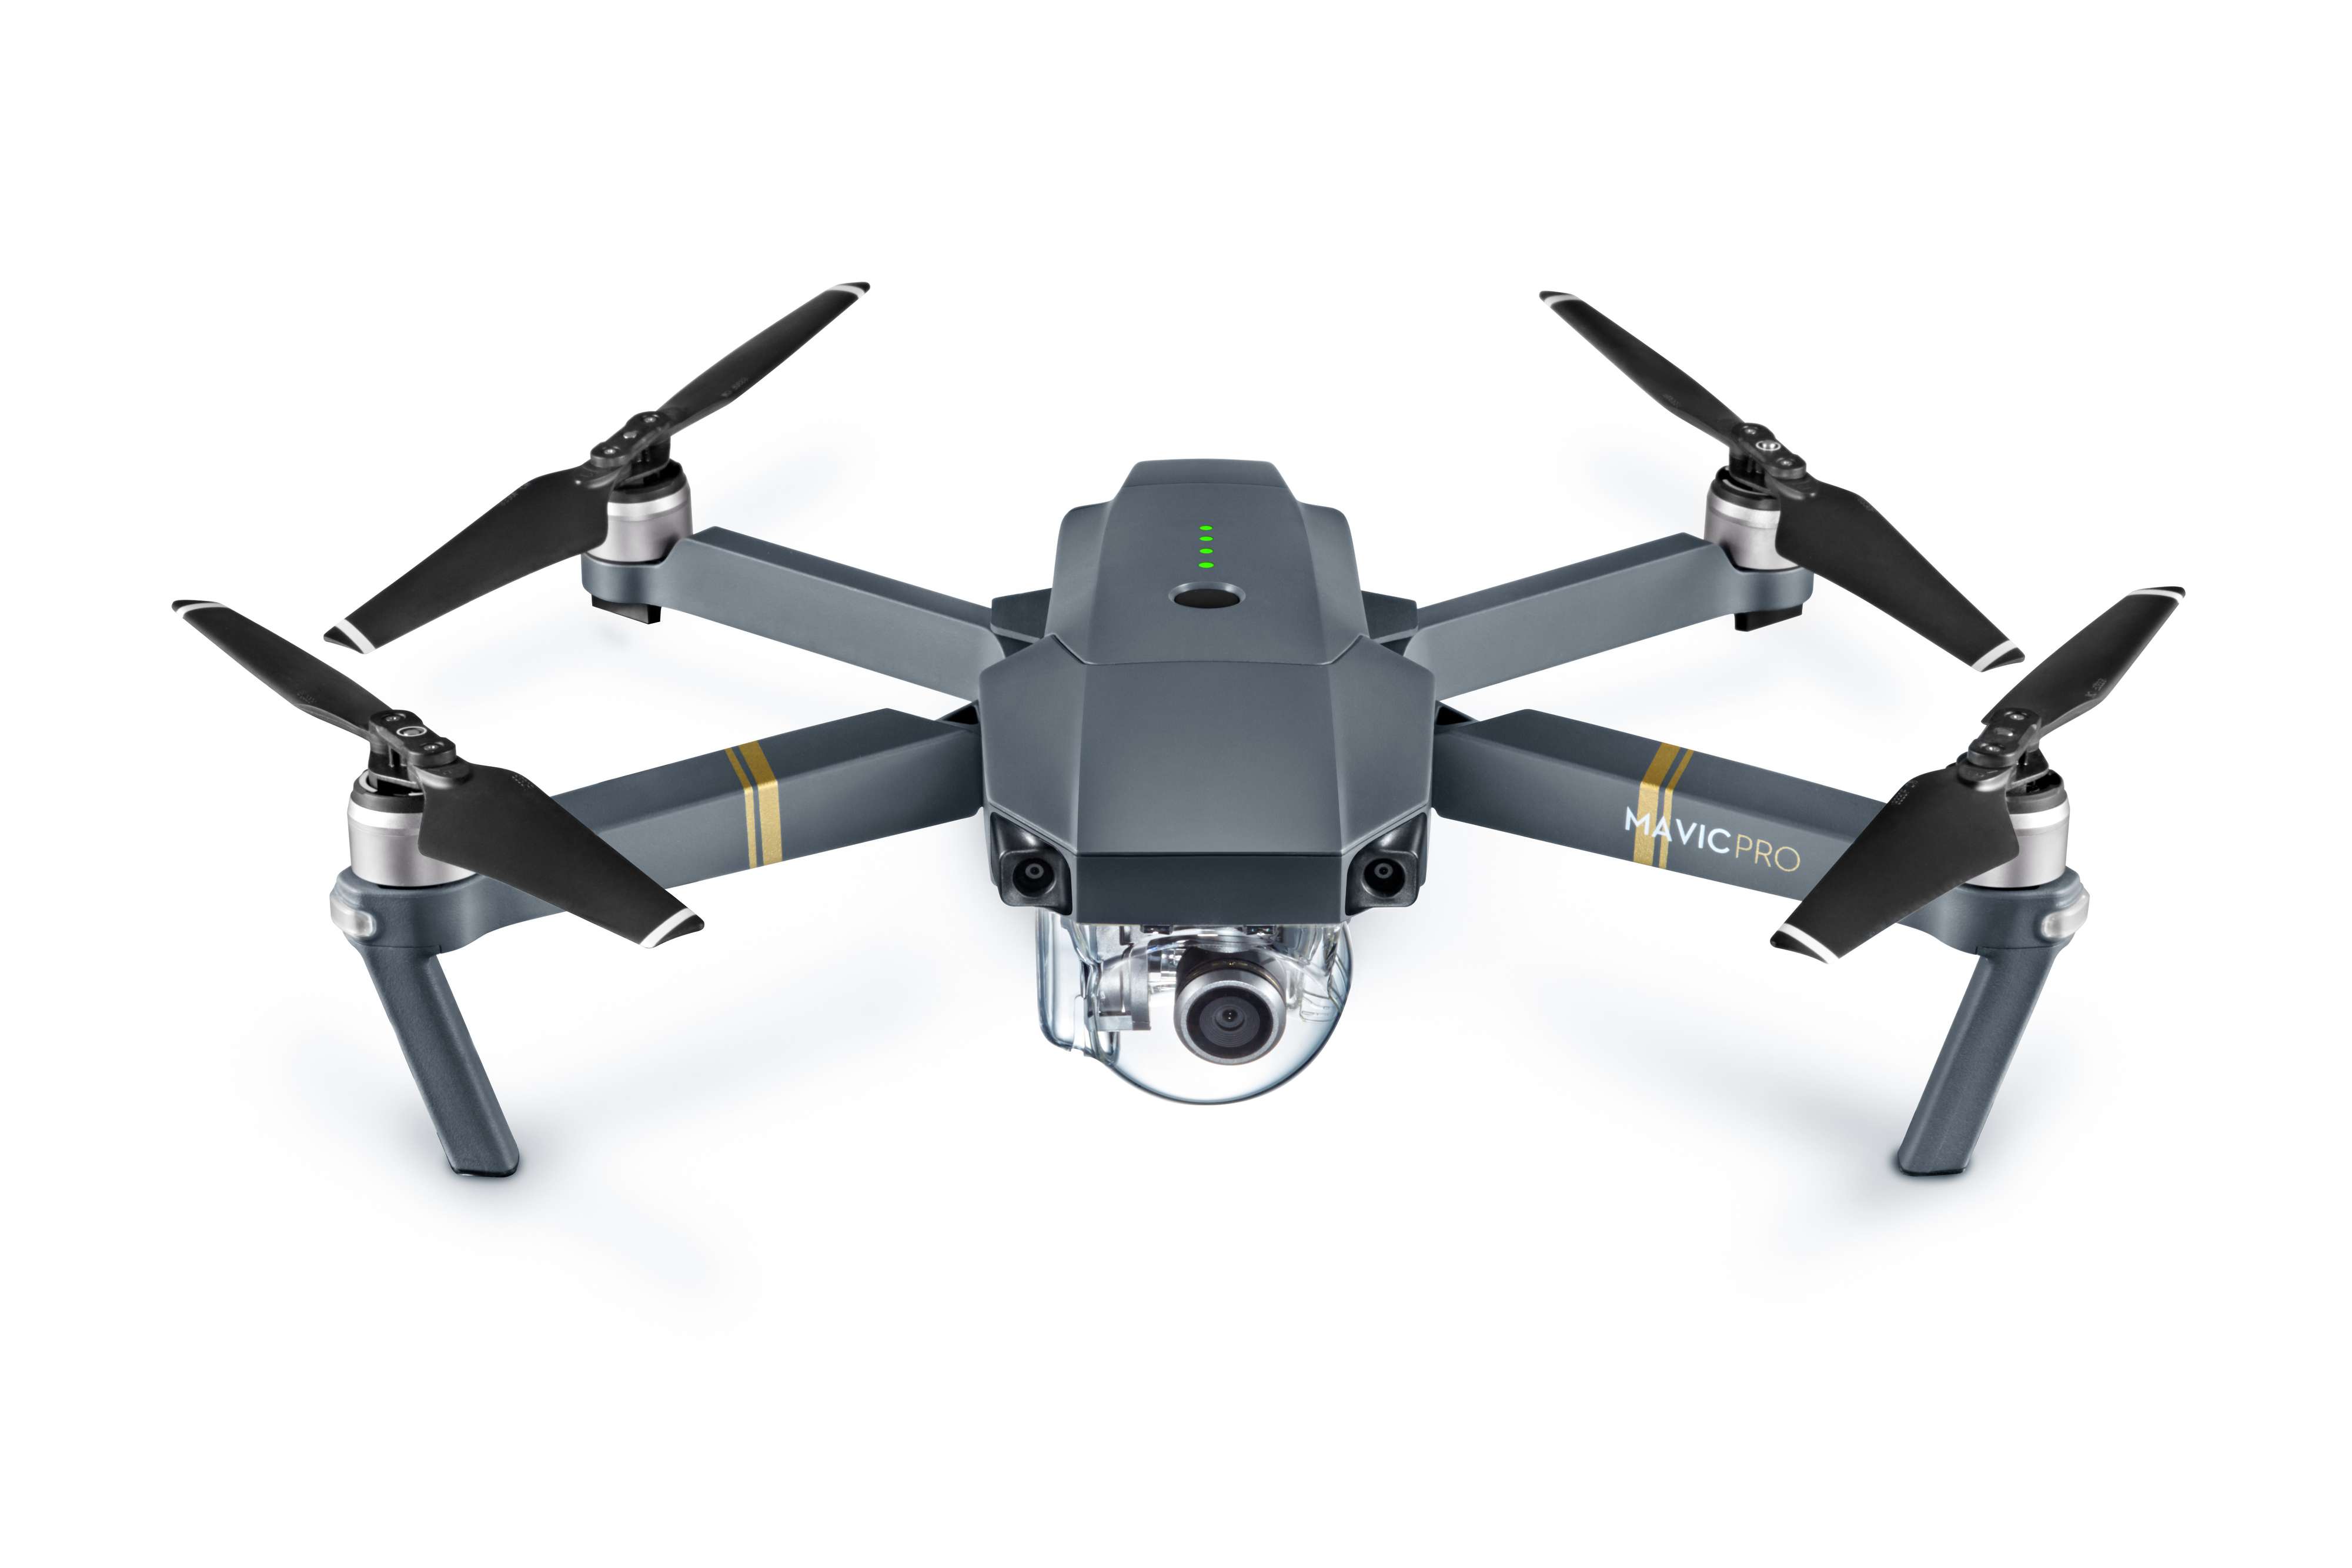 Market leader DJI’s latest drone, the Mavic Pro, which it says folds down for easy transport and can be in flight within a minute of reassembly. Photo: SCMP Pictures (Handout)